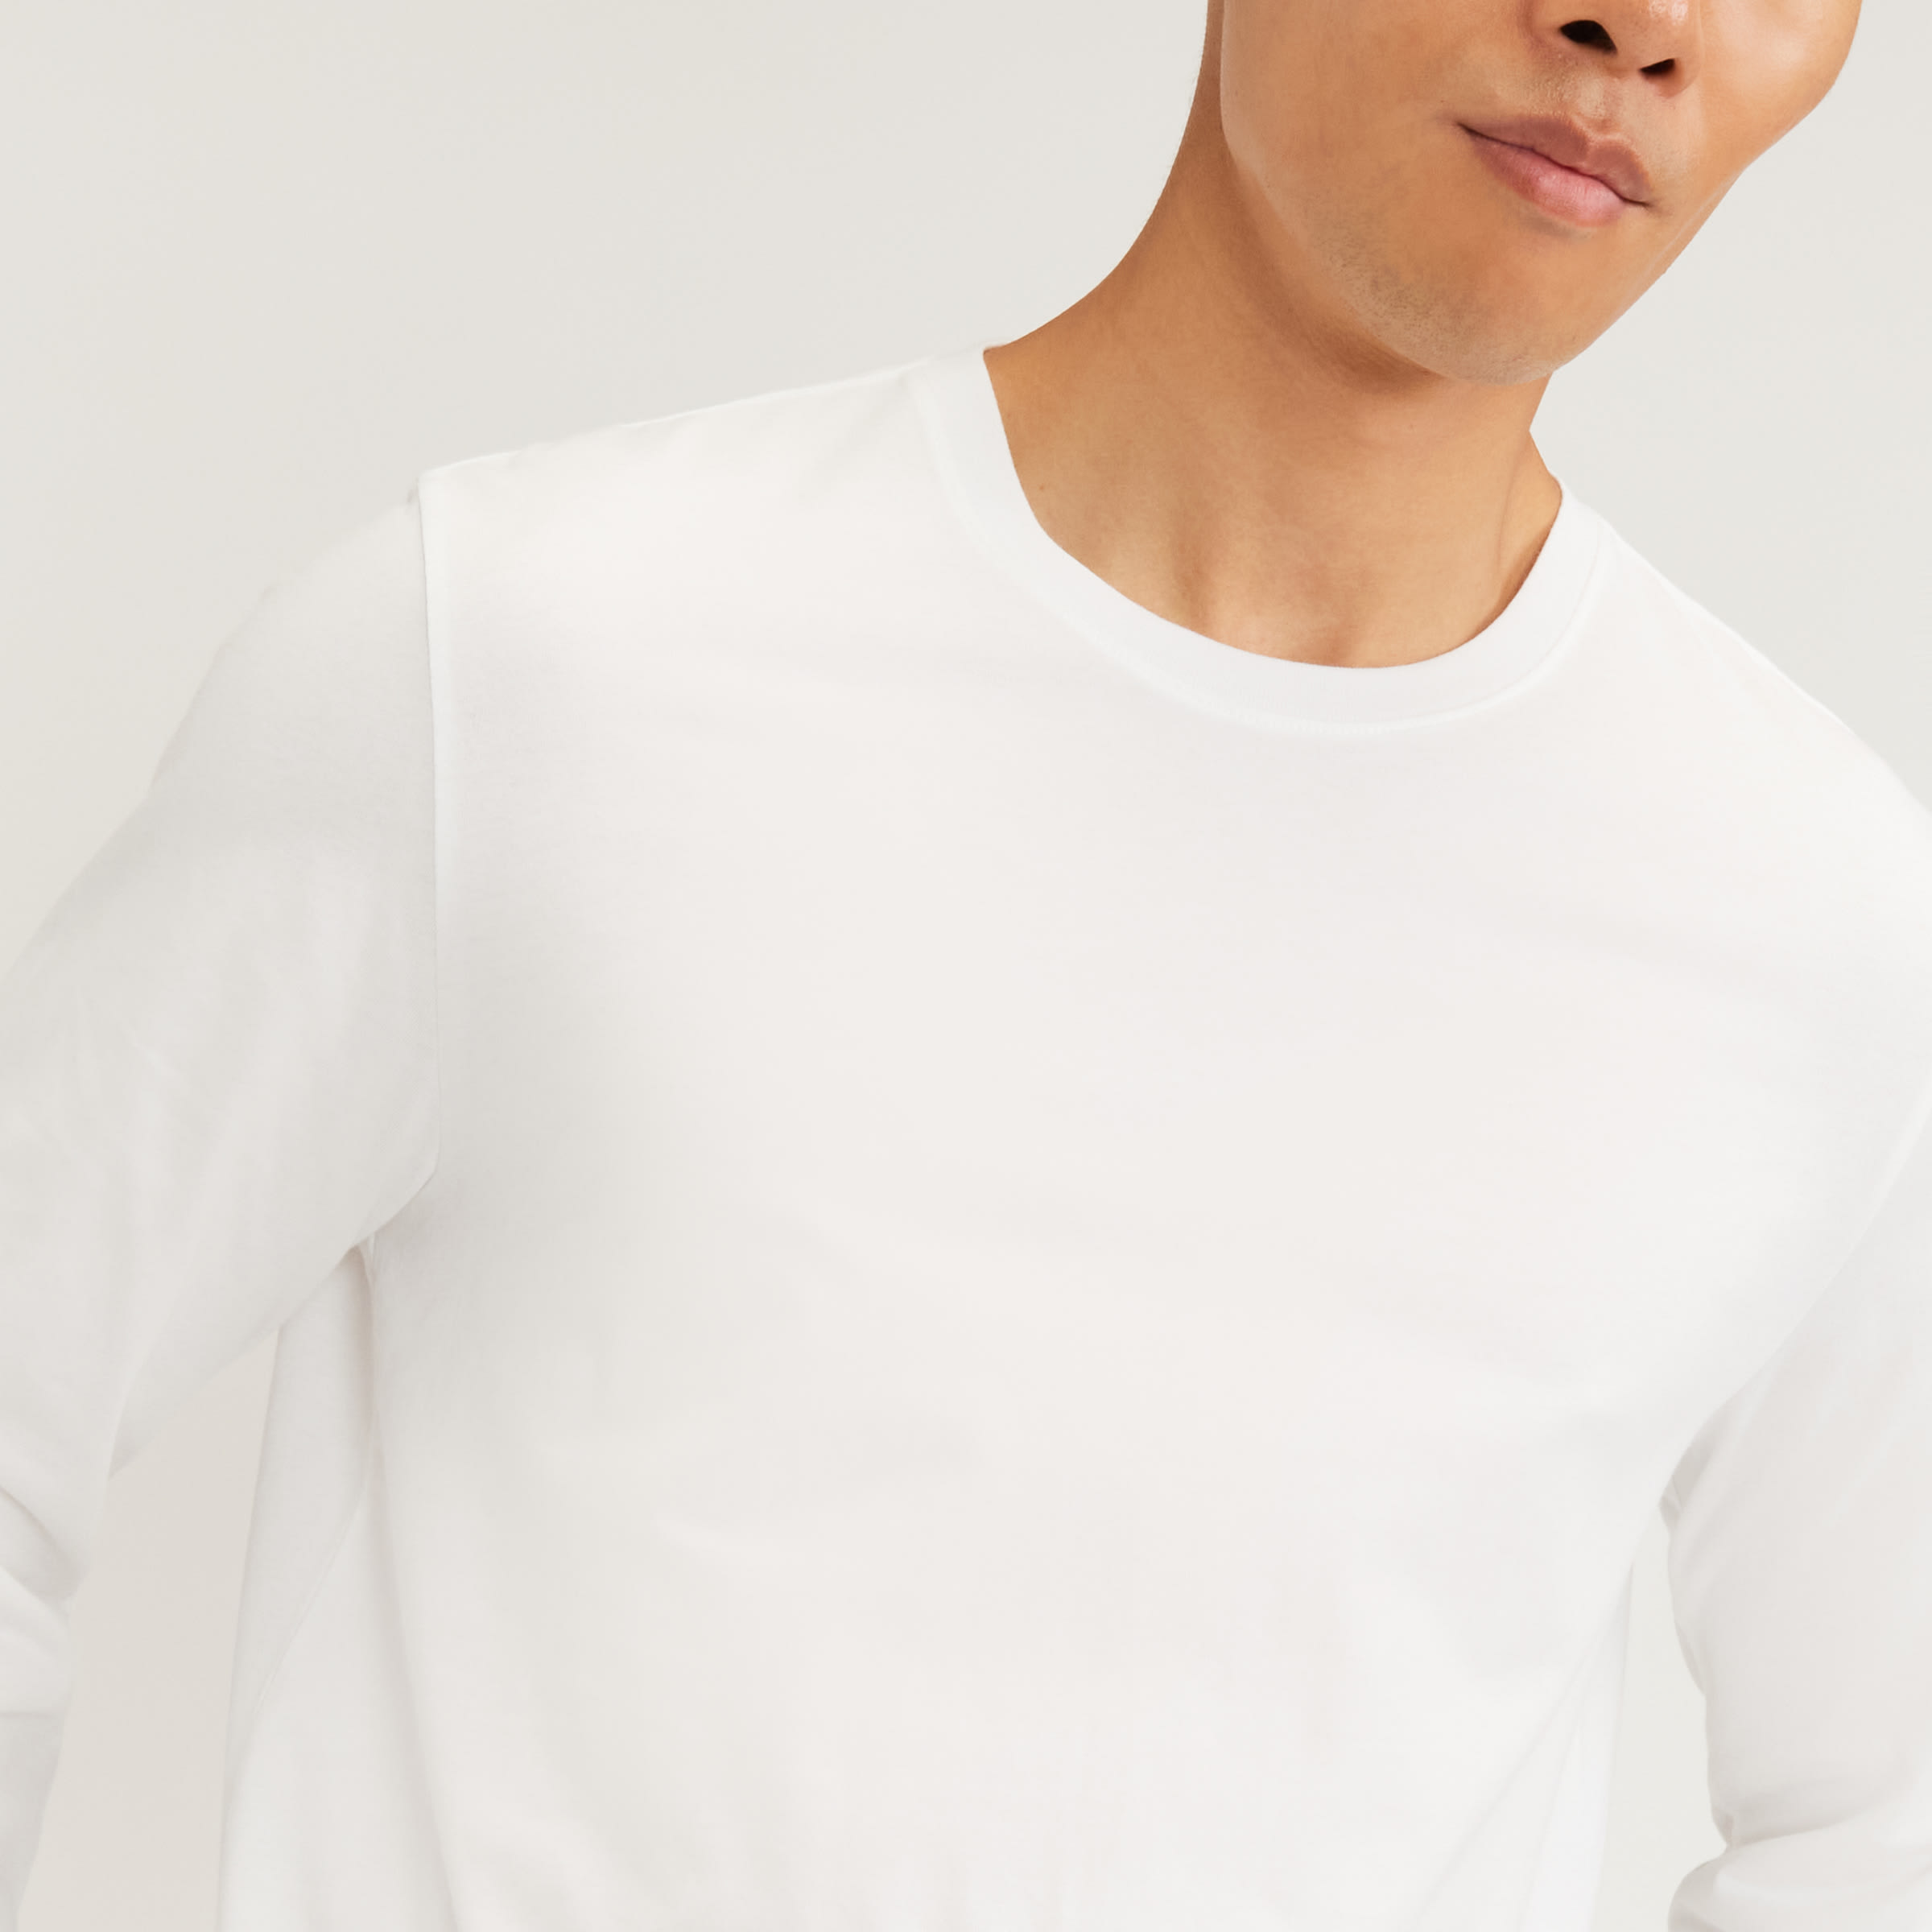 The Perfect Long Sleeve Tee - White